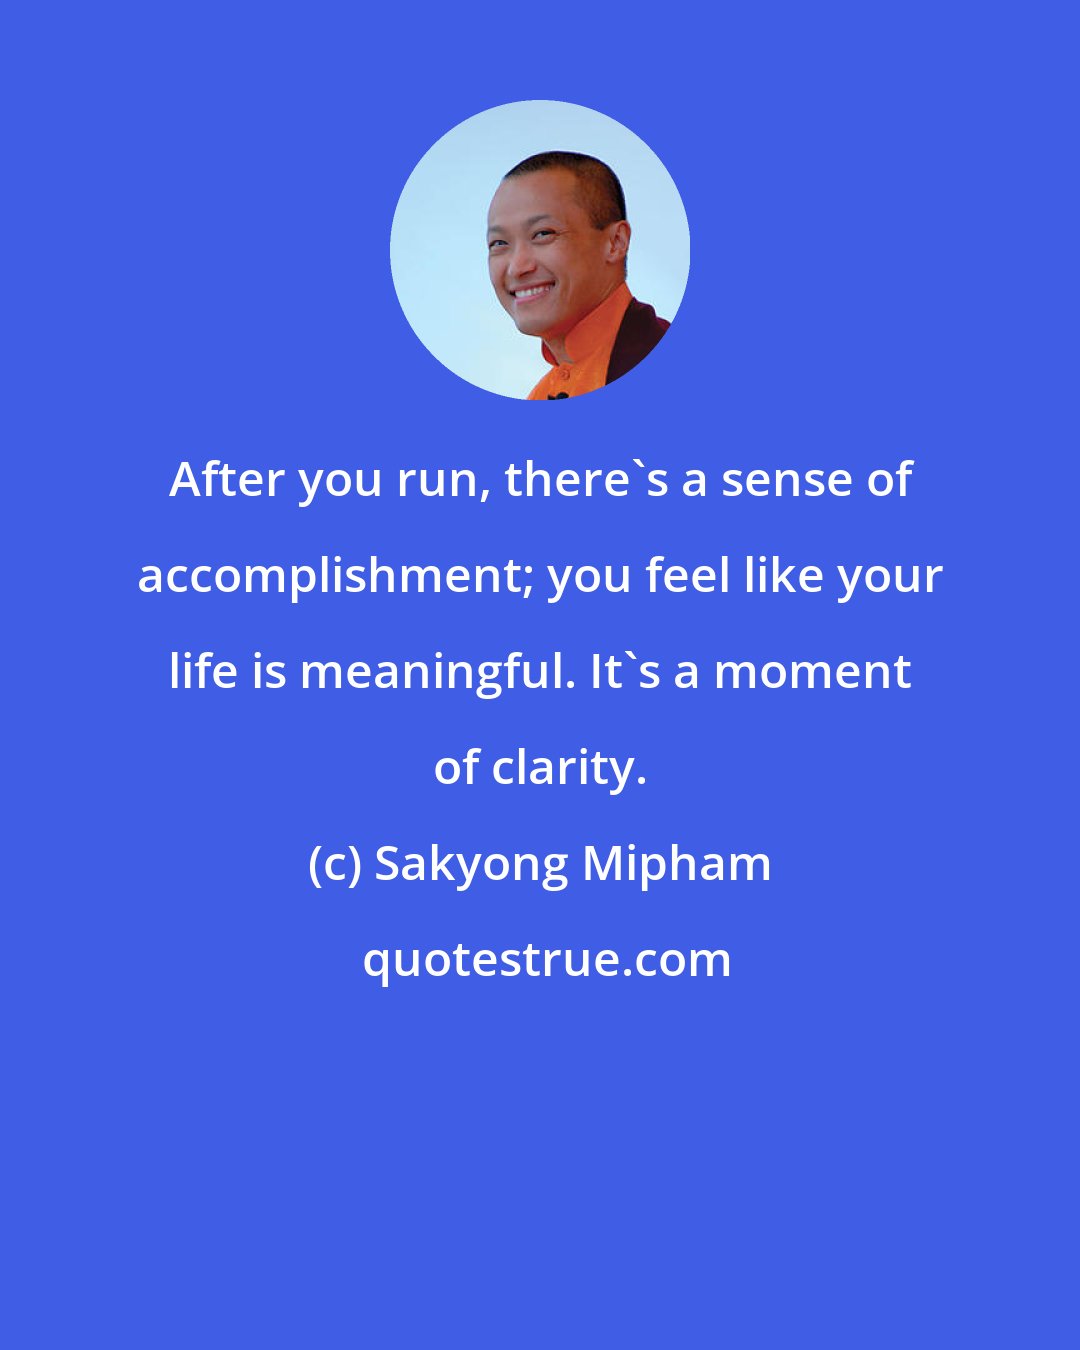 Sakyong Mipham: After you run, there's a sense of accomplishment; you feel like your life is meaningful. It's a moment of clarity.